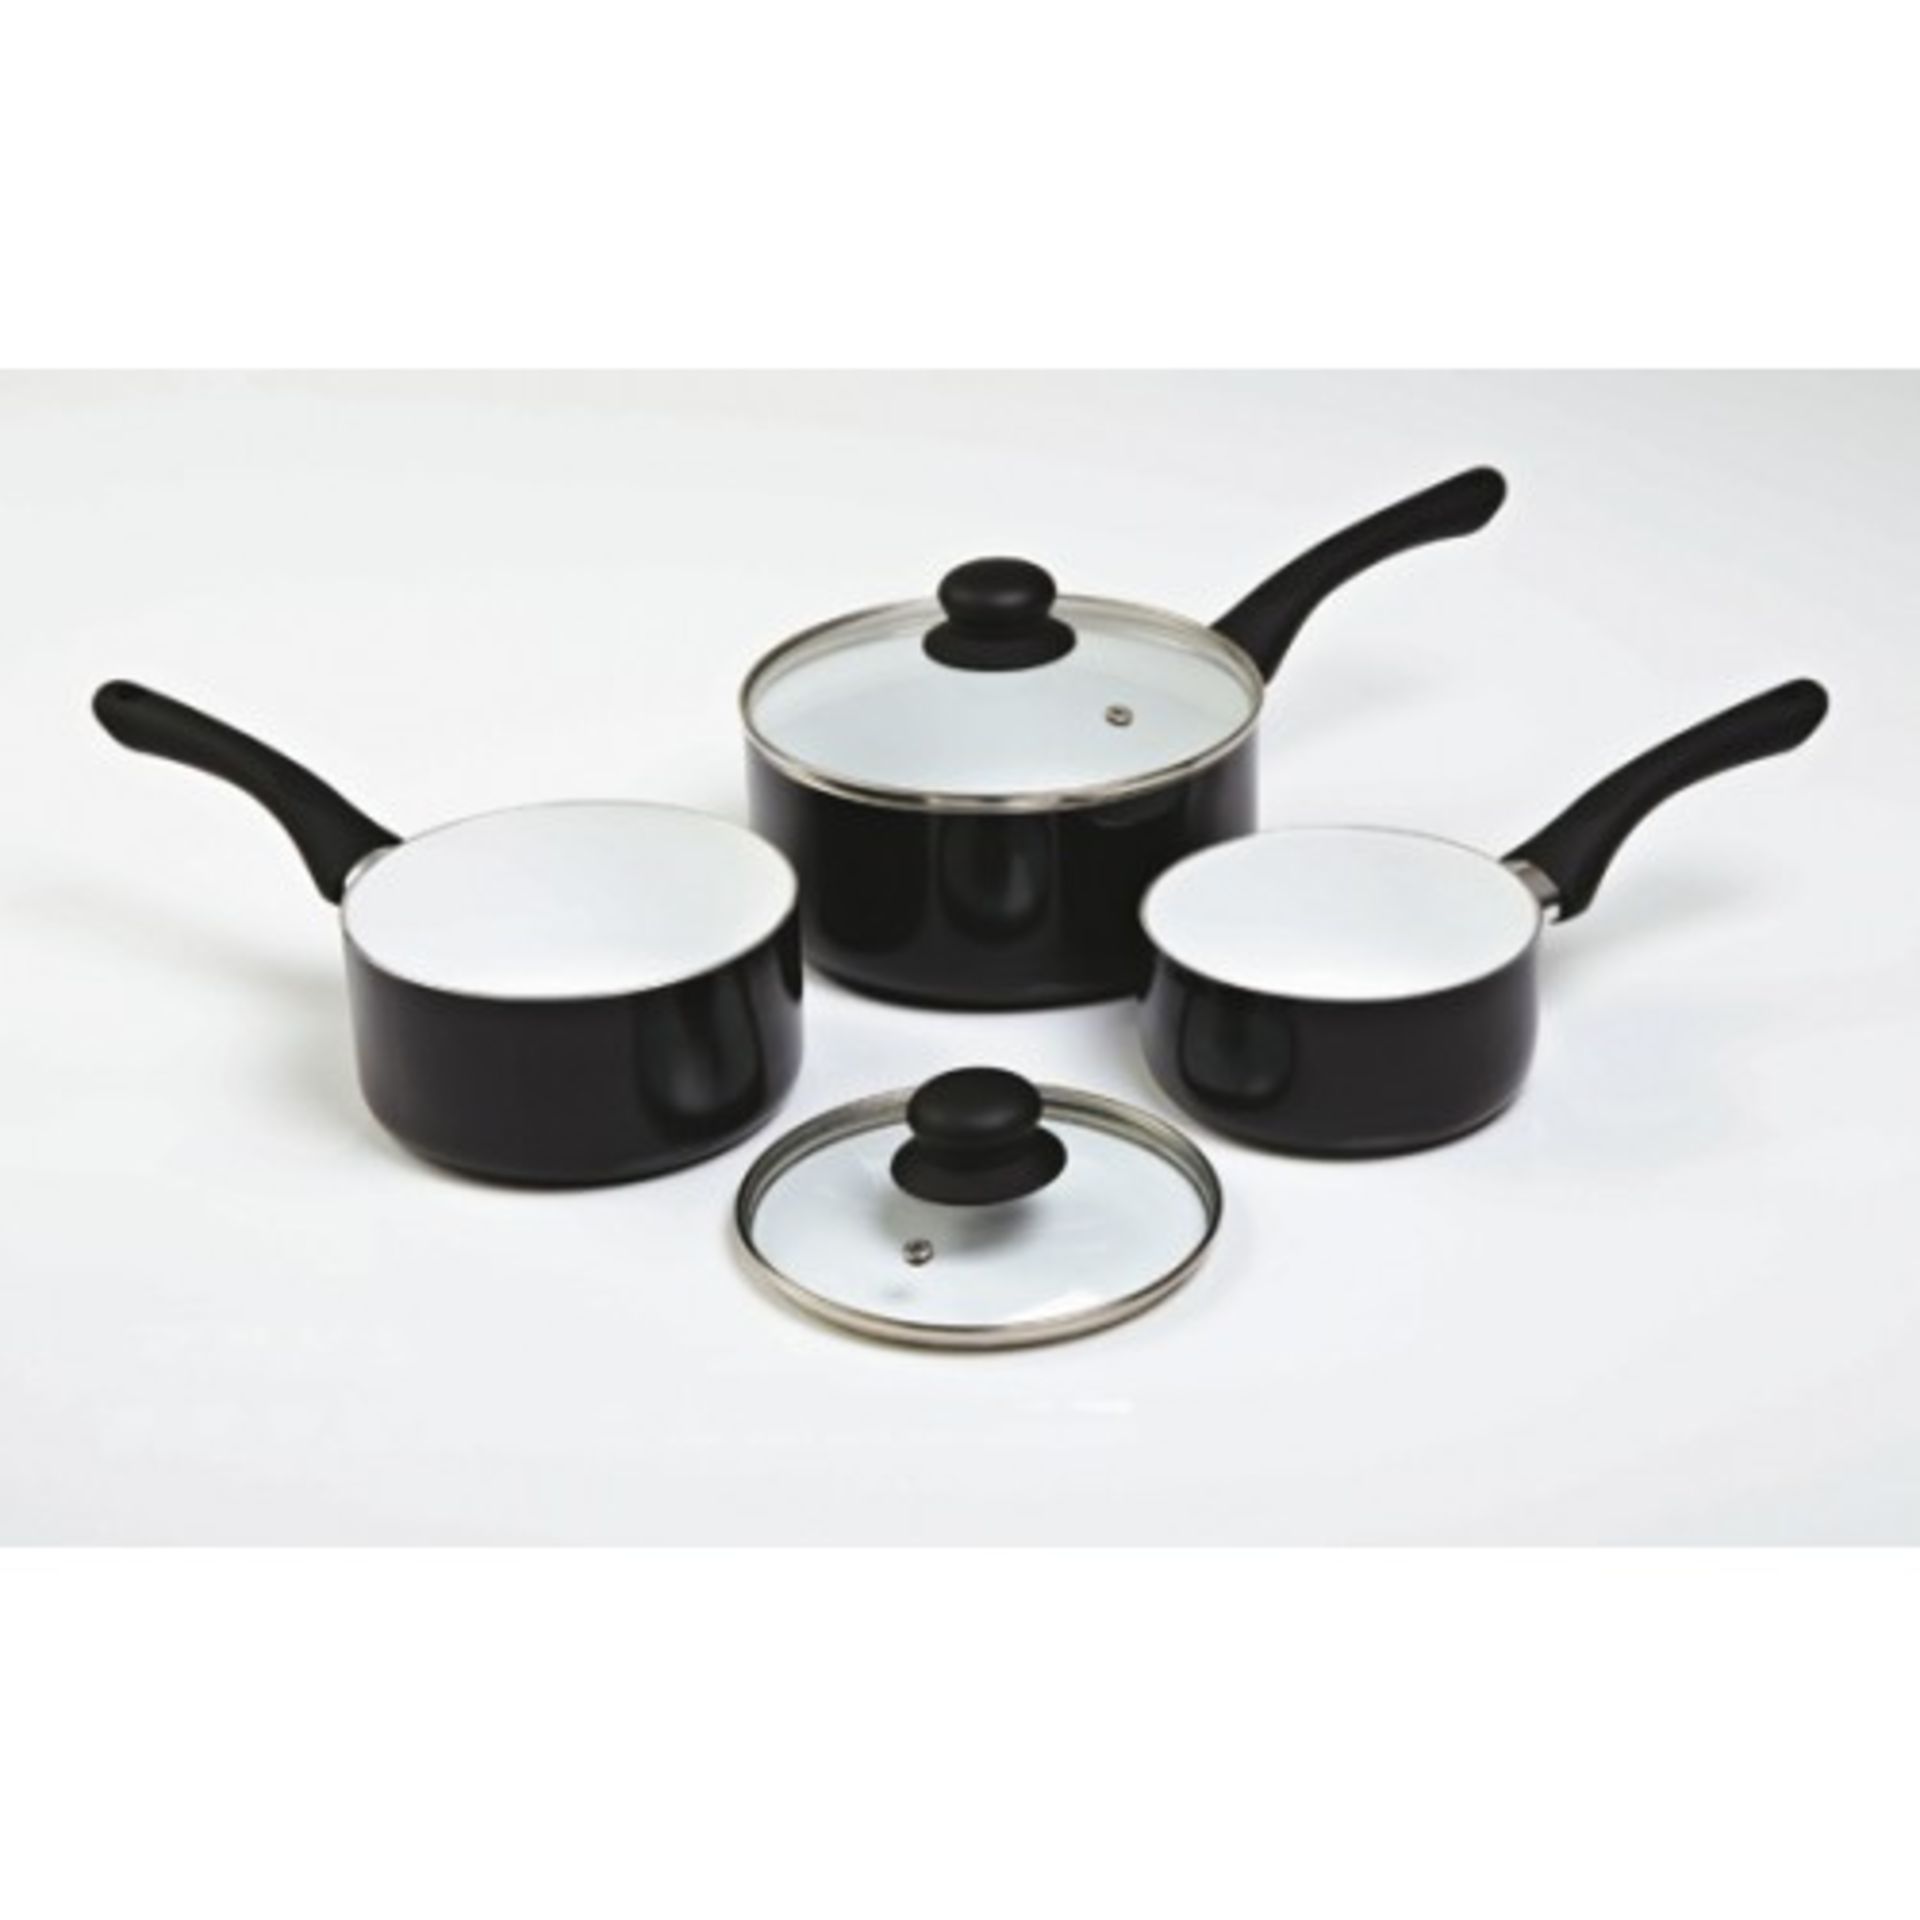 V Brand New Set Three Blue Cermalon Non Stick Ceramic Coating Saucepan Set With Two Glass Lids (As